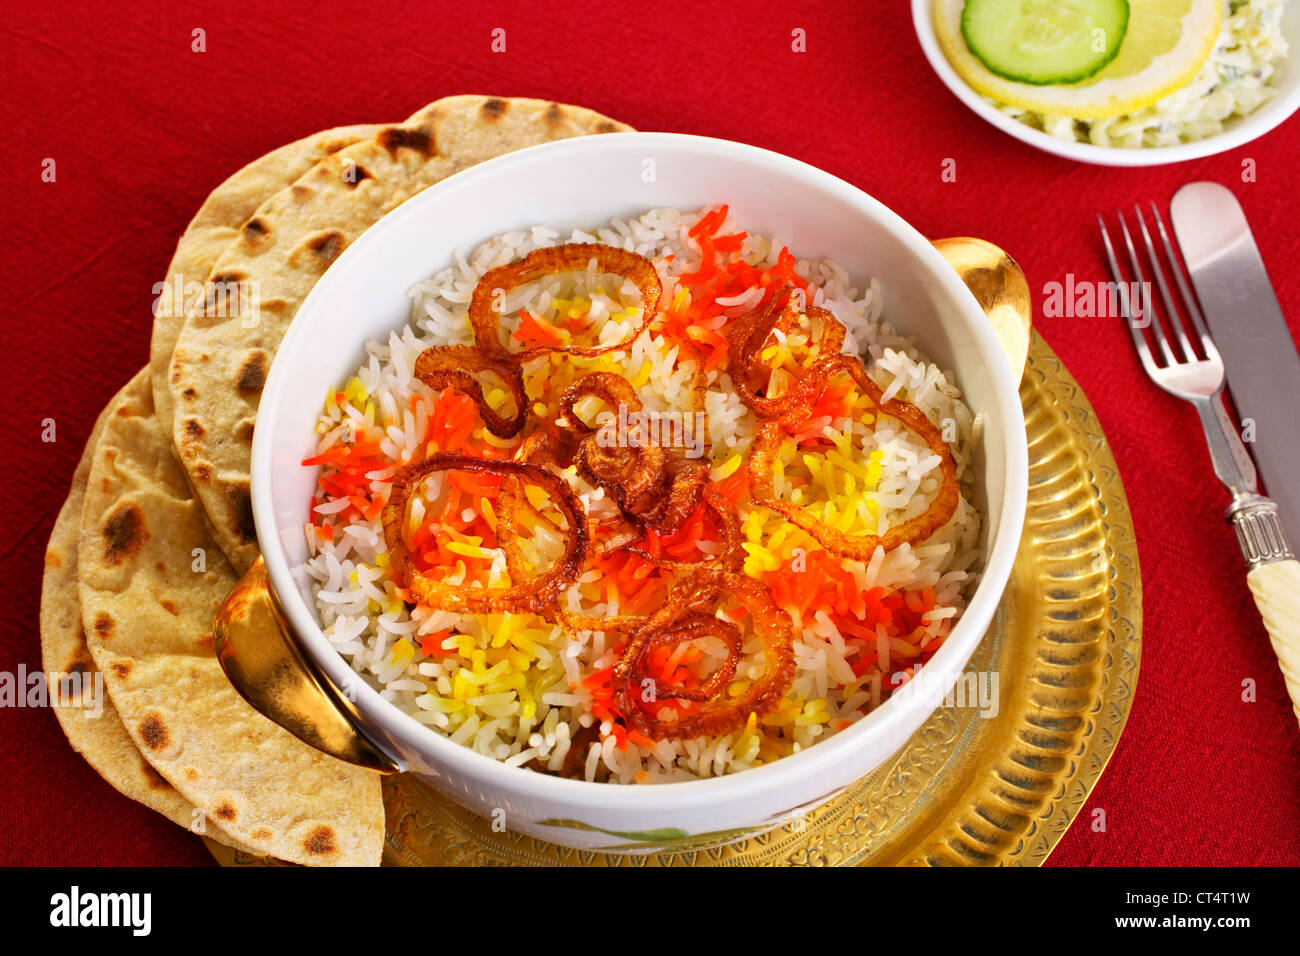 Luxurious lamb biryani, with red and yellow coloured rice and crisply fried onions, chapatis and chutney. Stock Photo